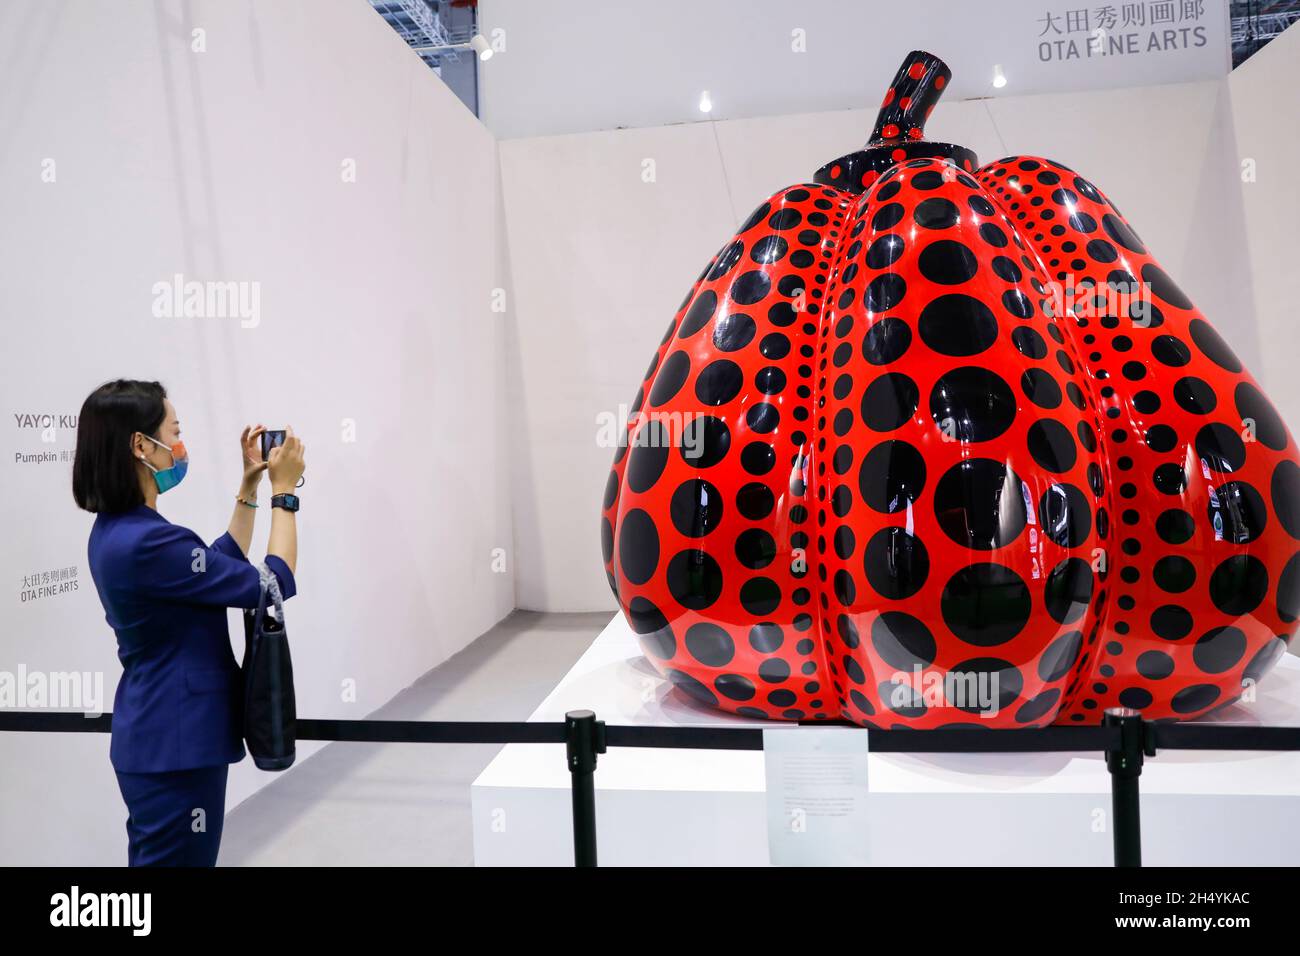 The Pumpkin sculptures by Japanese artist Yayoi Kusama are on News  Photo - Getty Images